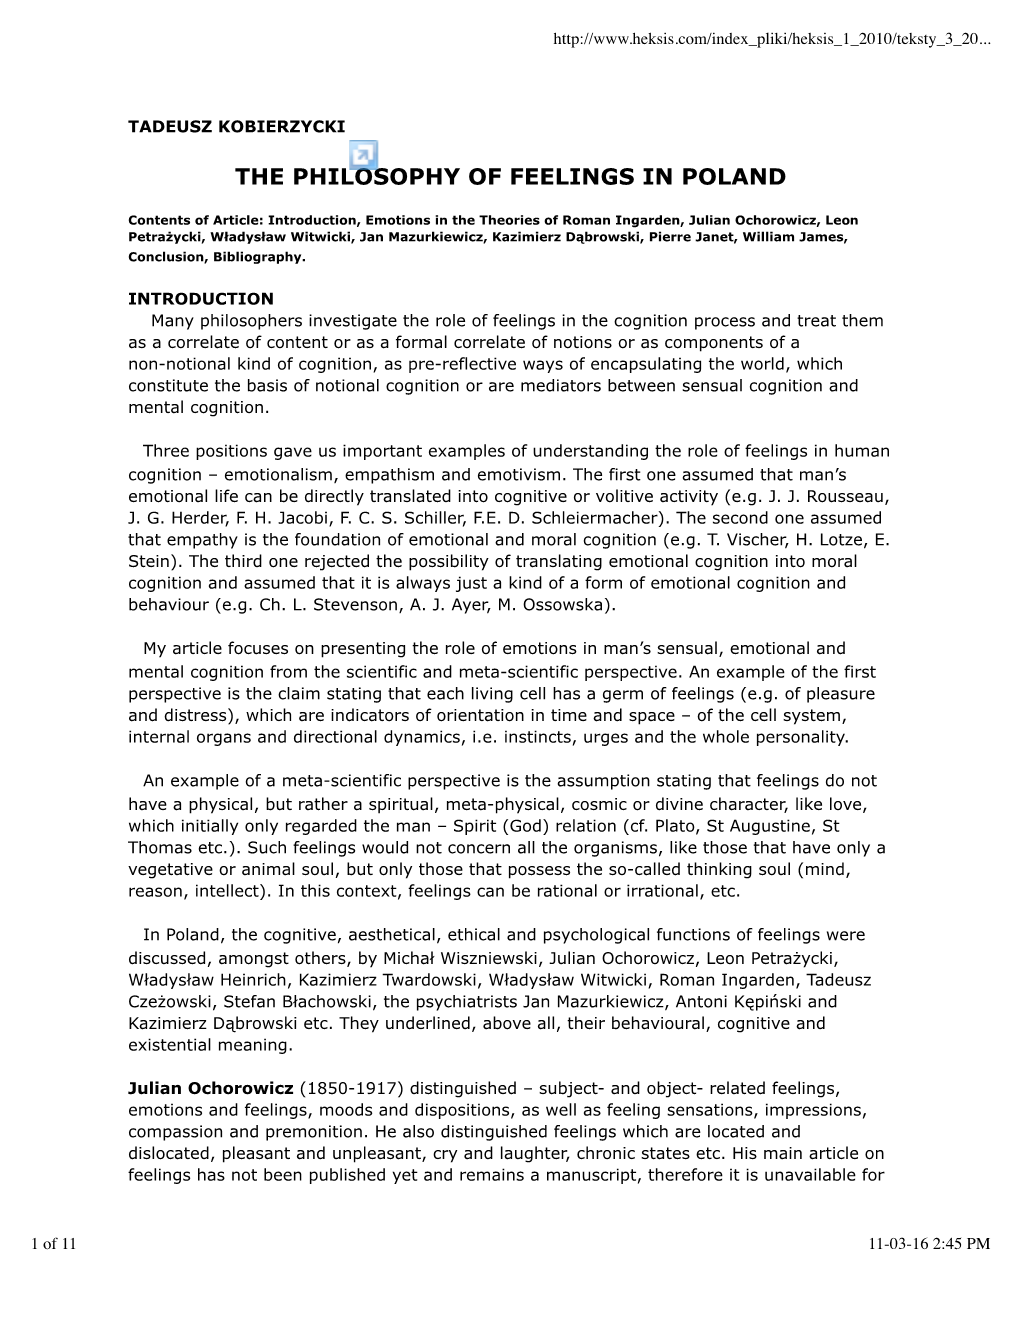 The Philosophy of Feelings in Poland